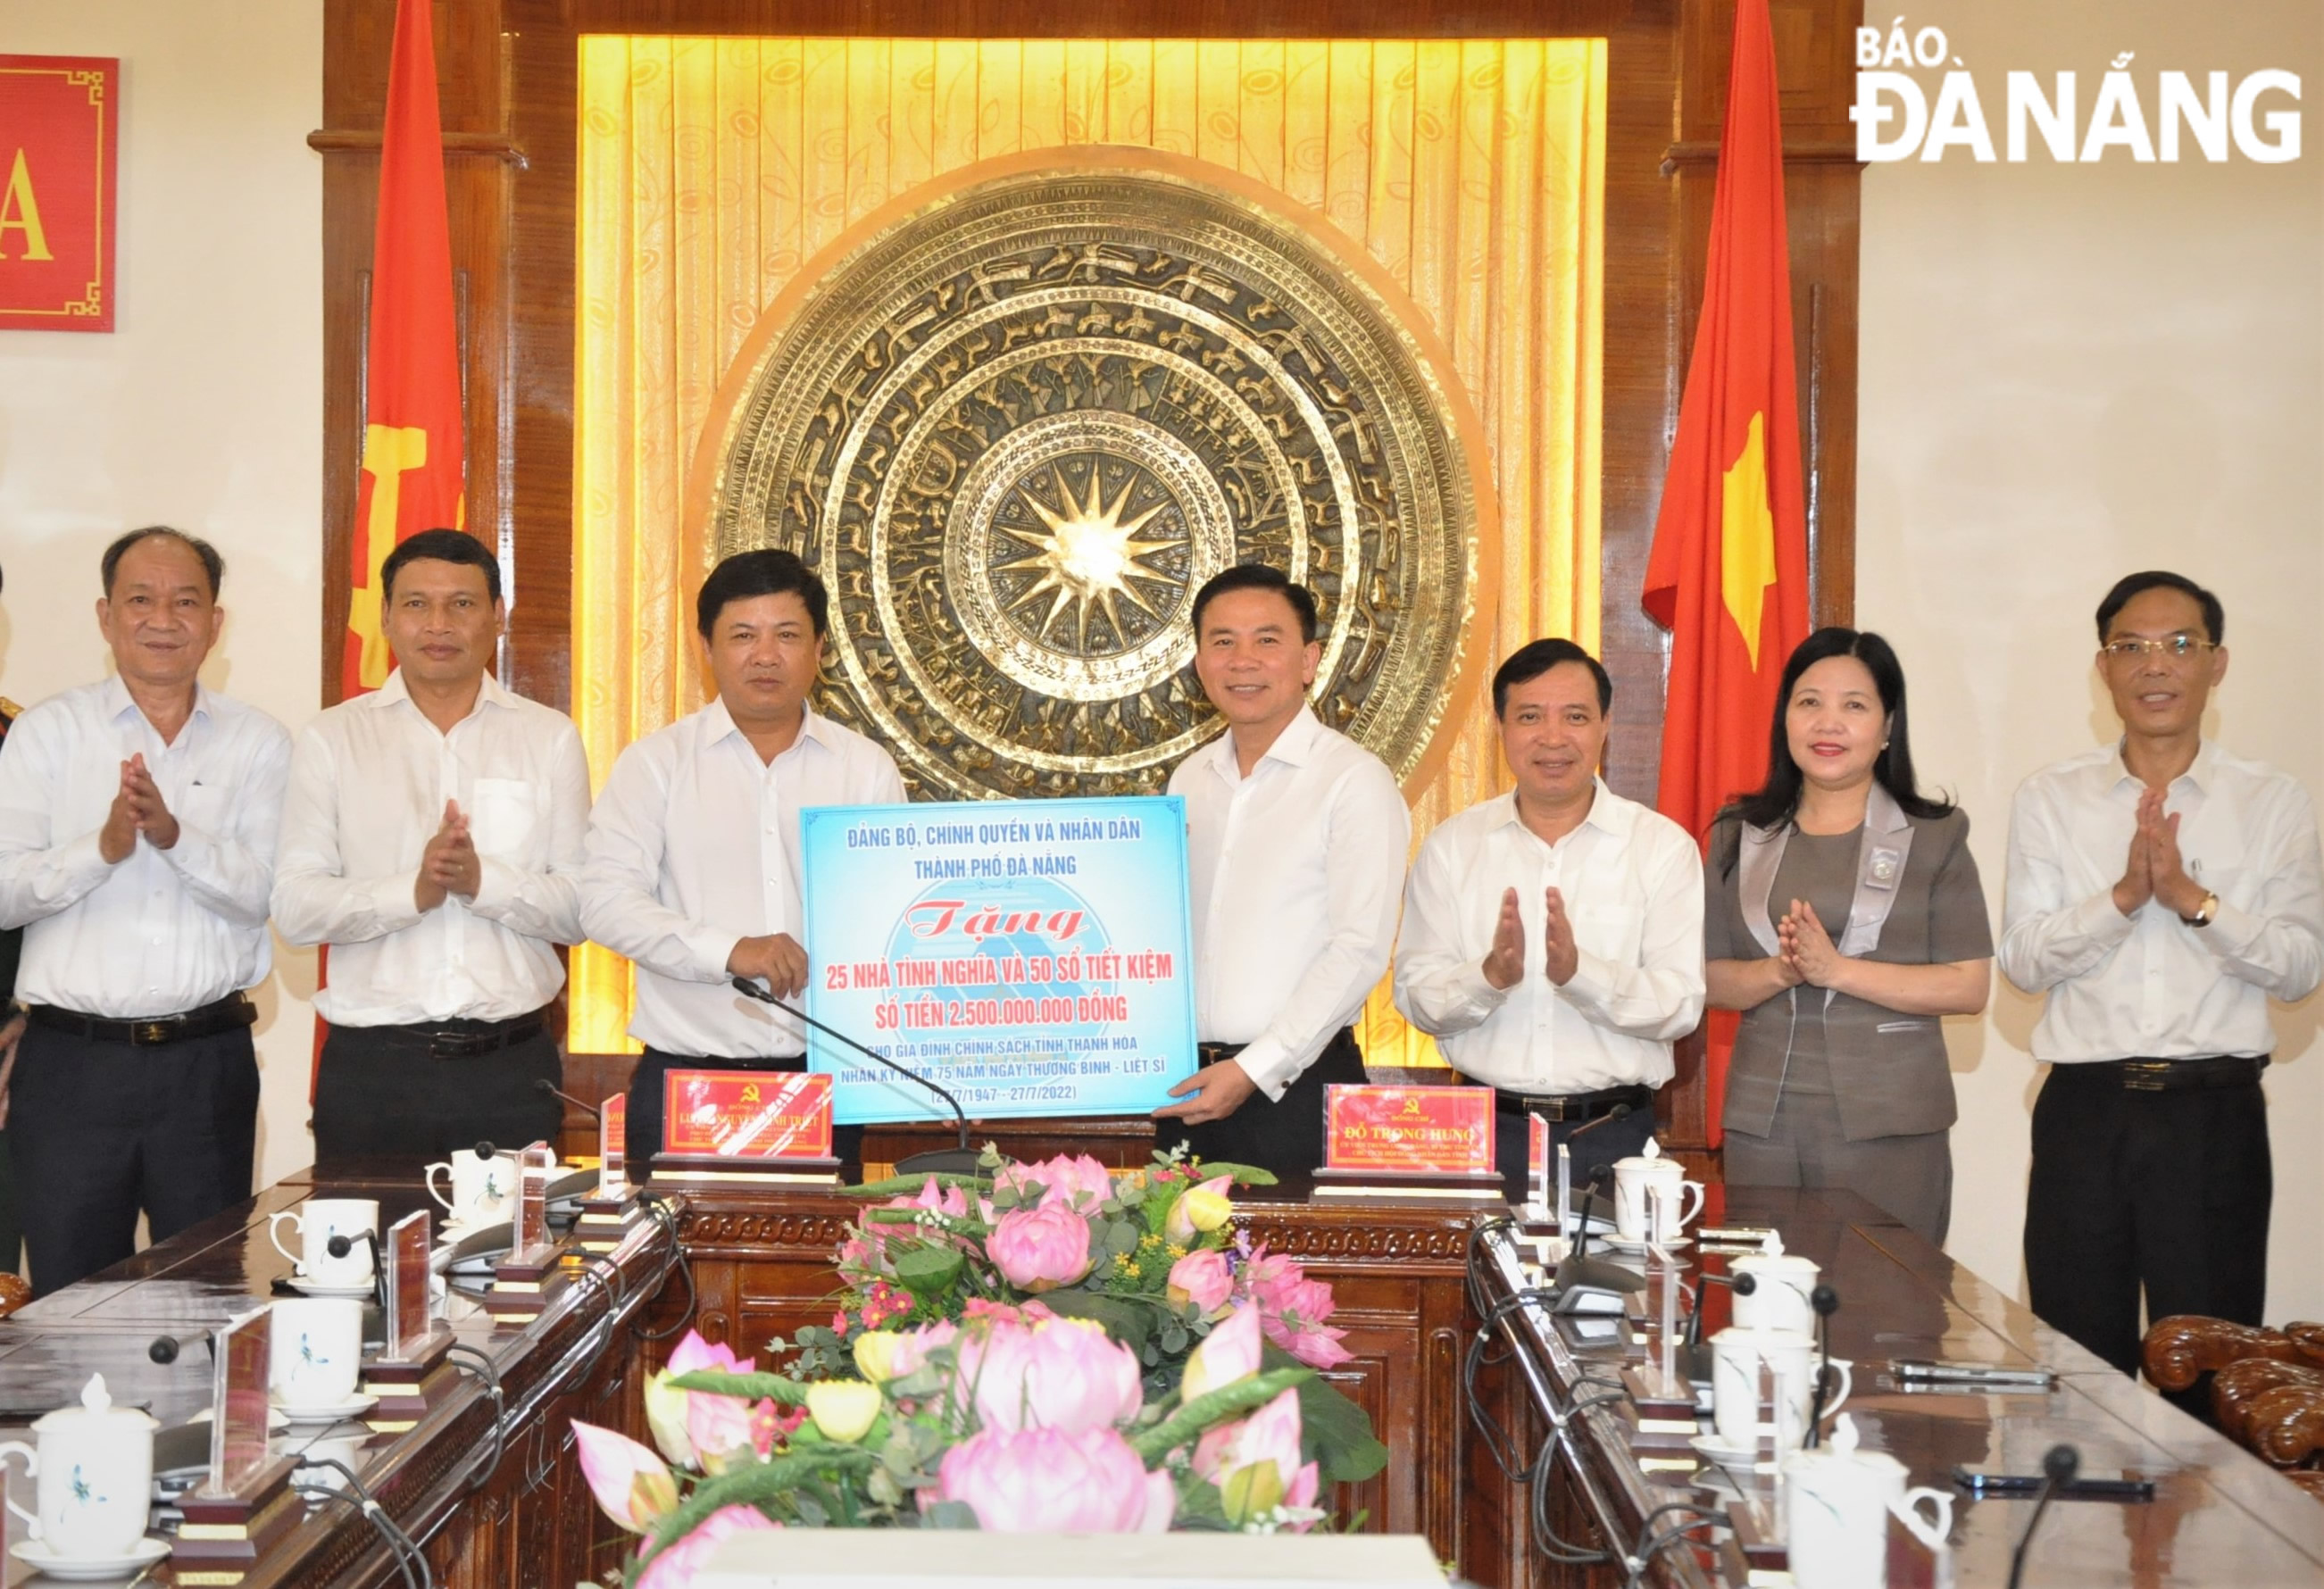 Mr Luong Nguyen Minh Triet (third from the left) presenting a symbolic board of 25 houses and 50 savings books to revolution contributors in Thanh Hoa Province. Photo: LE HUNG